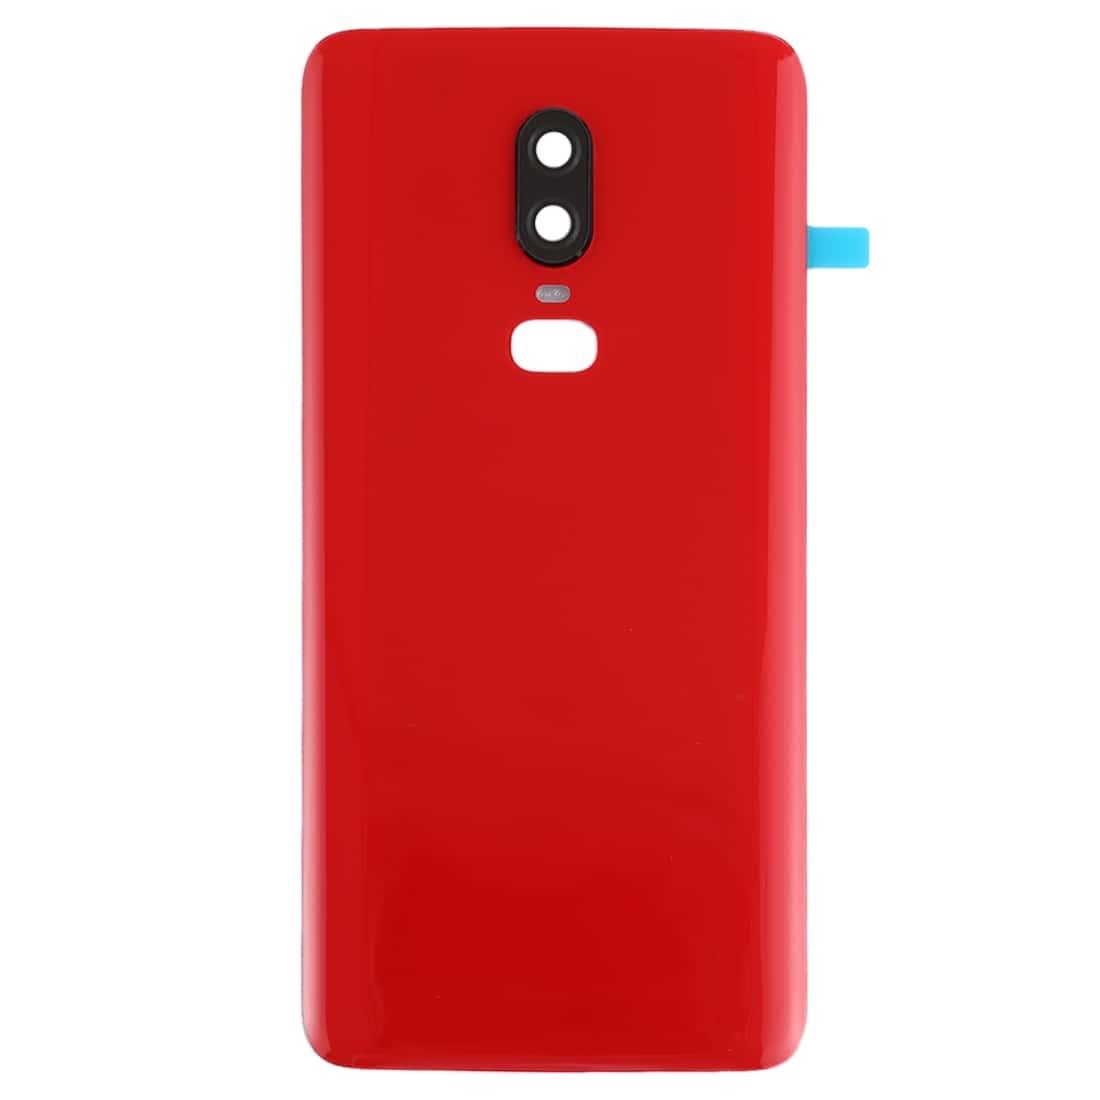 Back Glass Panel for Oneplus 6 Red with Camera Lens